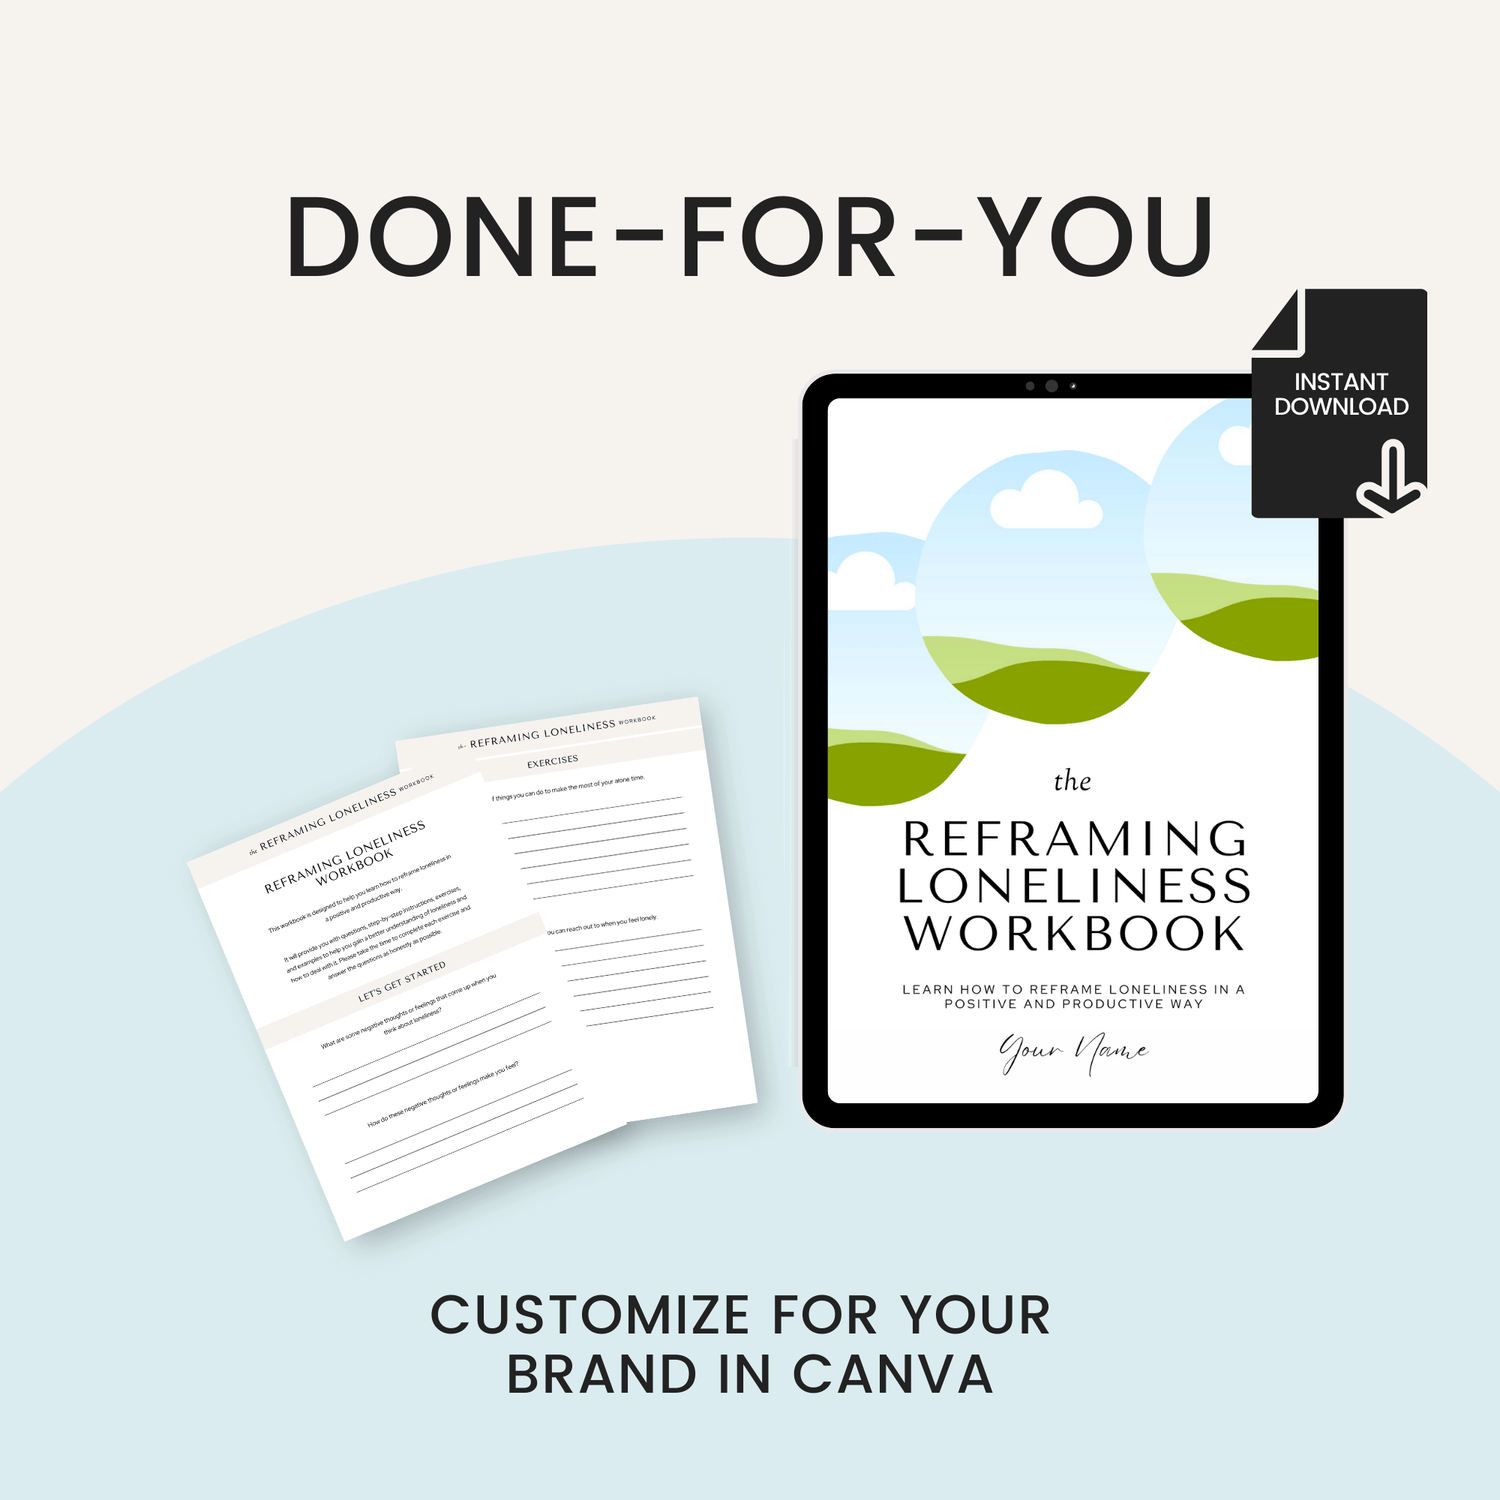 Done for Your Reframing Loneliness Workbook Customize in Canva